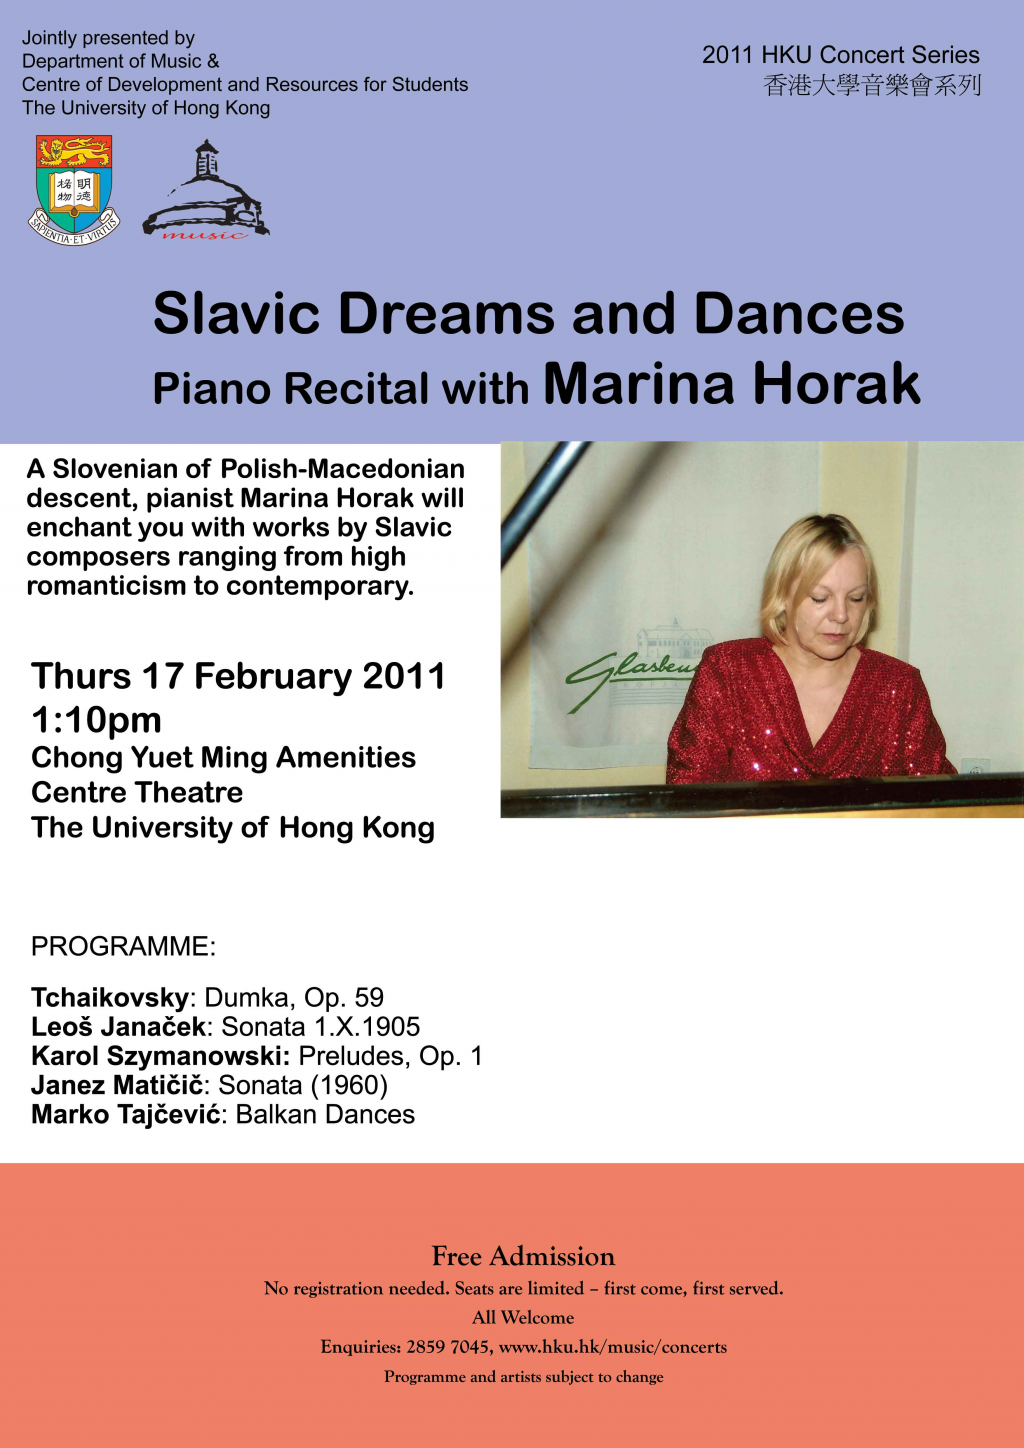 A Slovenian of Polish-Macedonian descent, pianist Marina Horak will enchant you with works by Slavic composers ranging from high romanticism to contemporary.